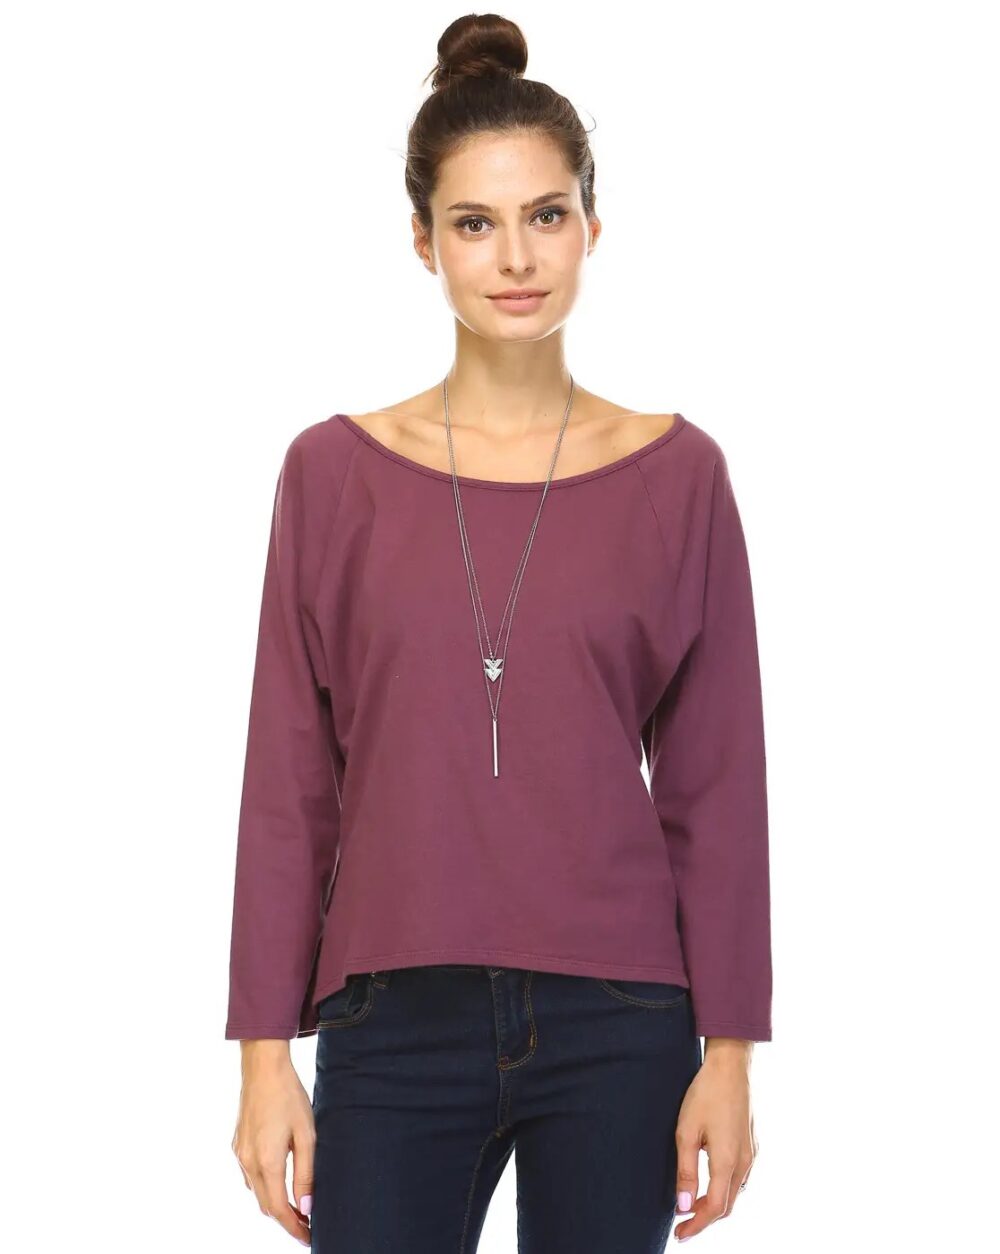 Loose Fit Top With Back Slashing Detail Eggplant Made in USA